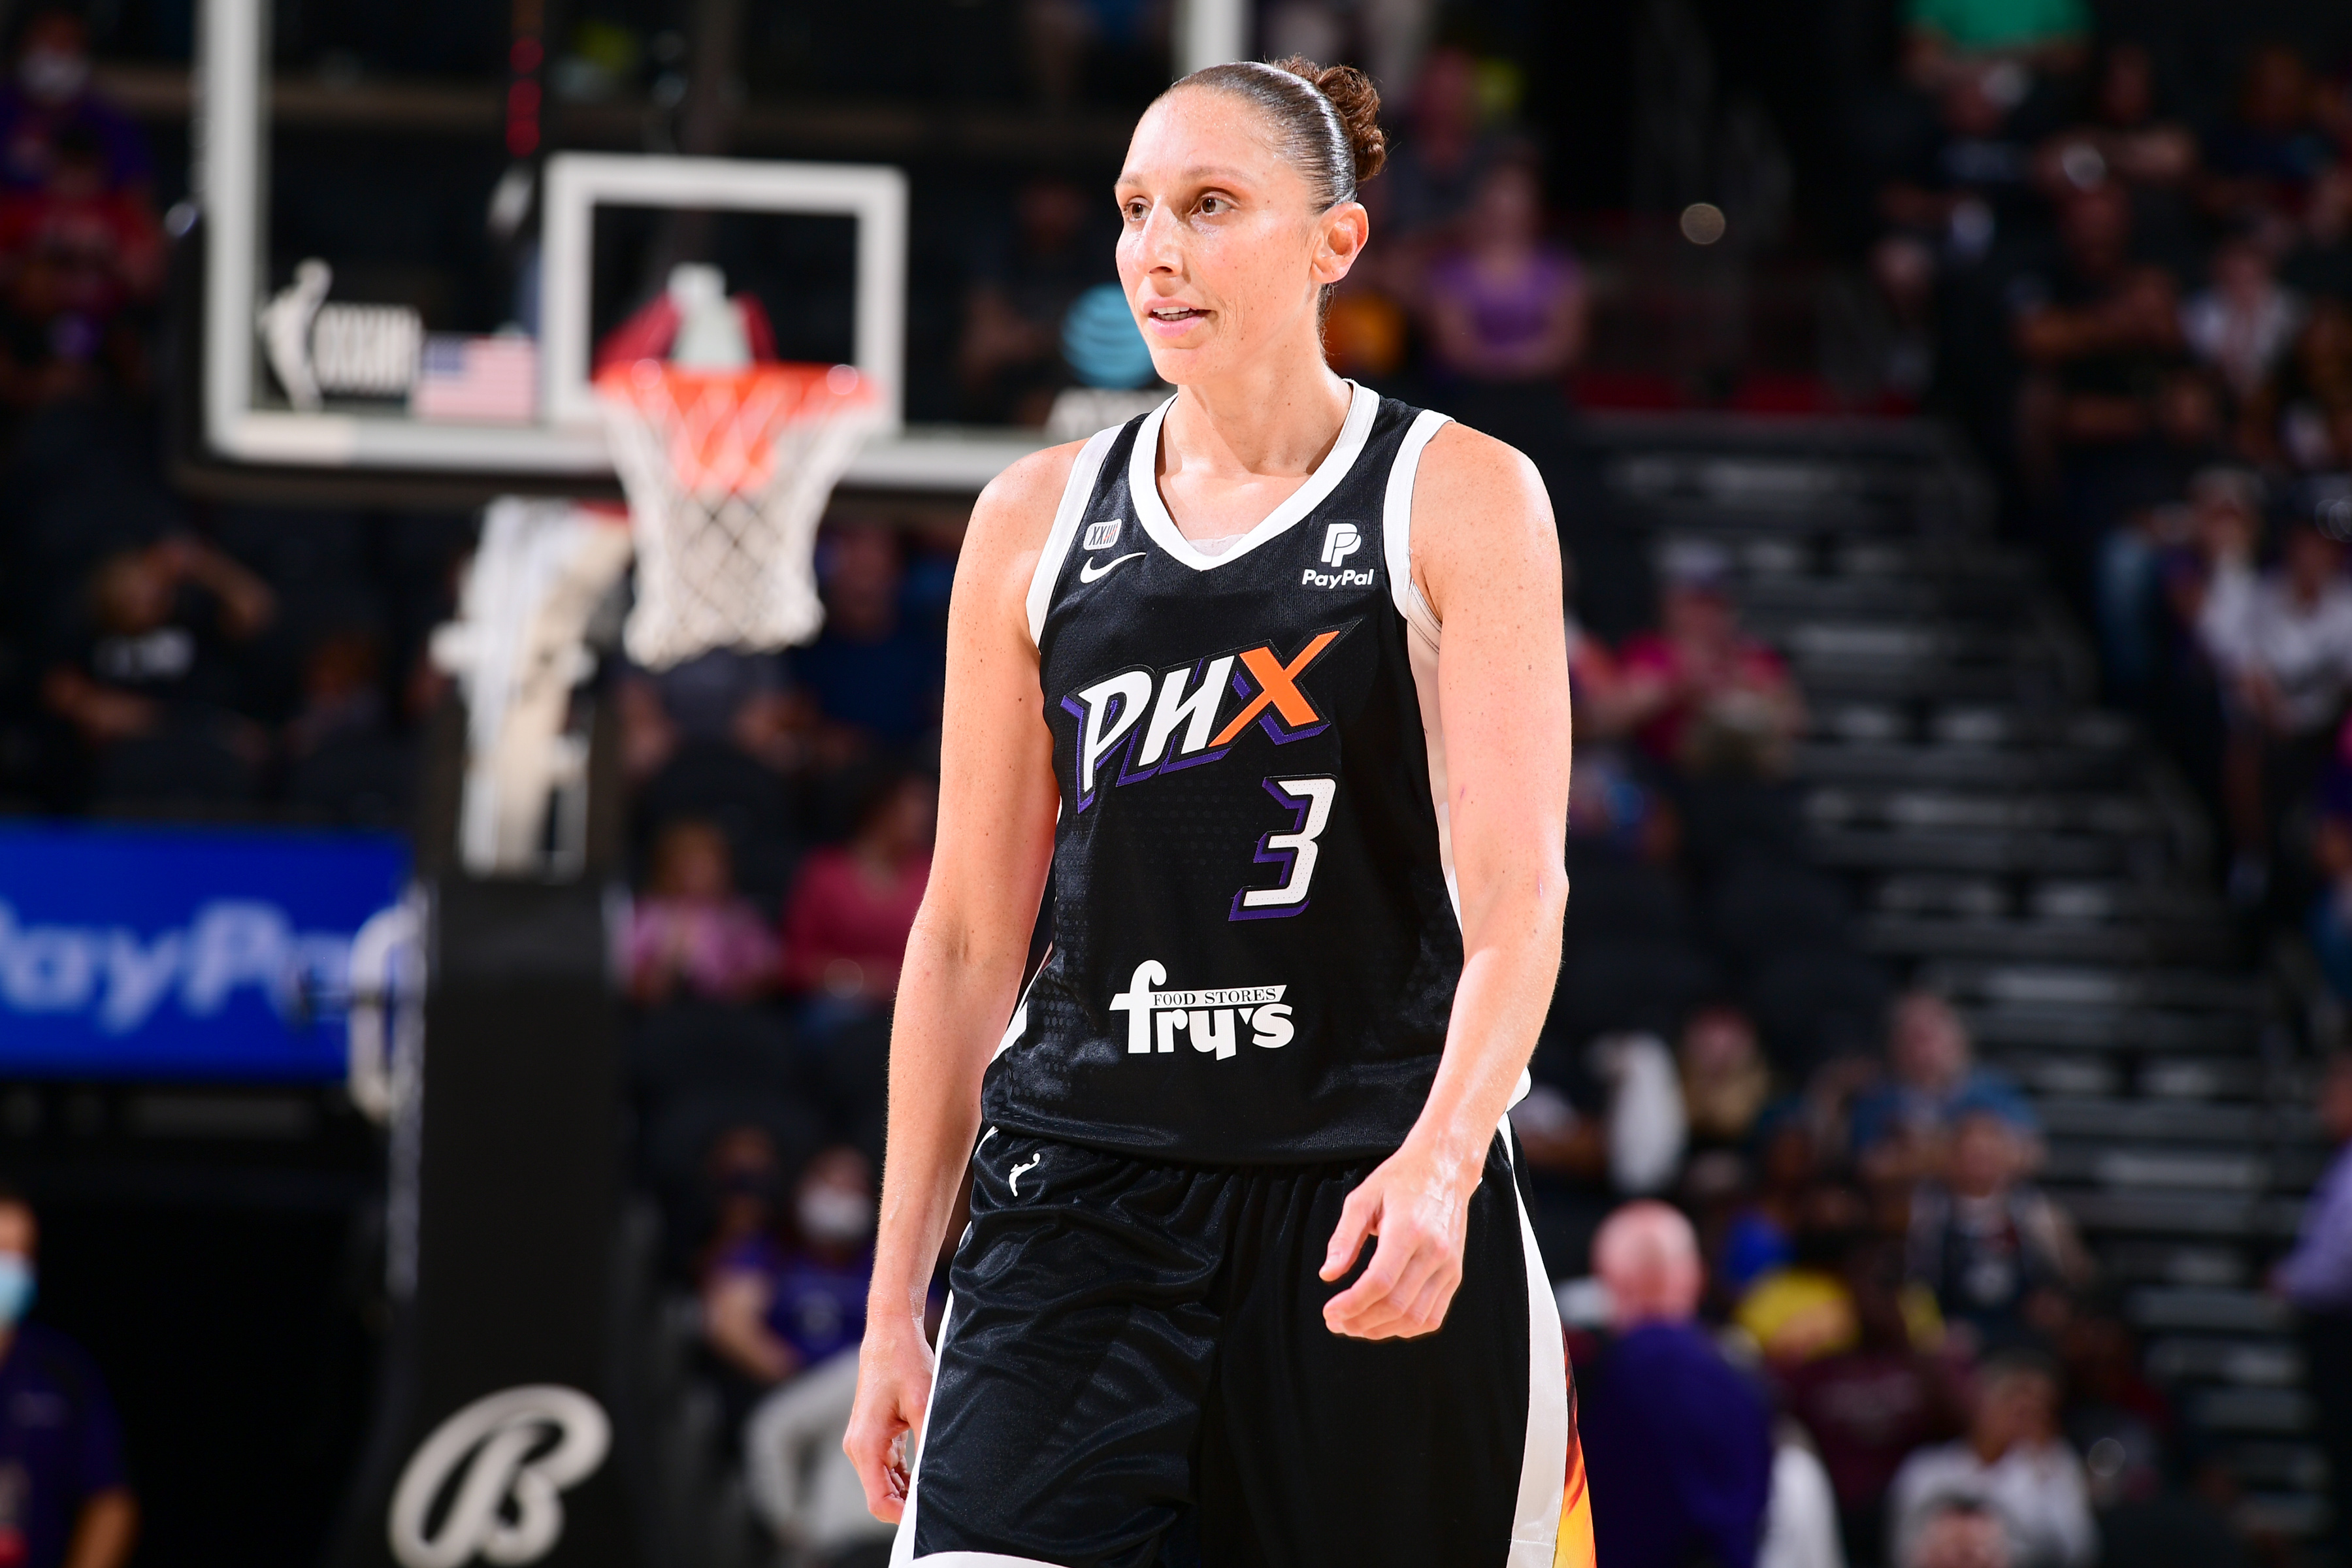 Mercury's Diana Taurasi 1st Player in WNBA History with 9,000